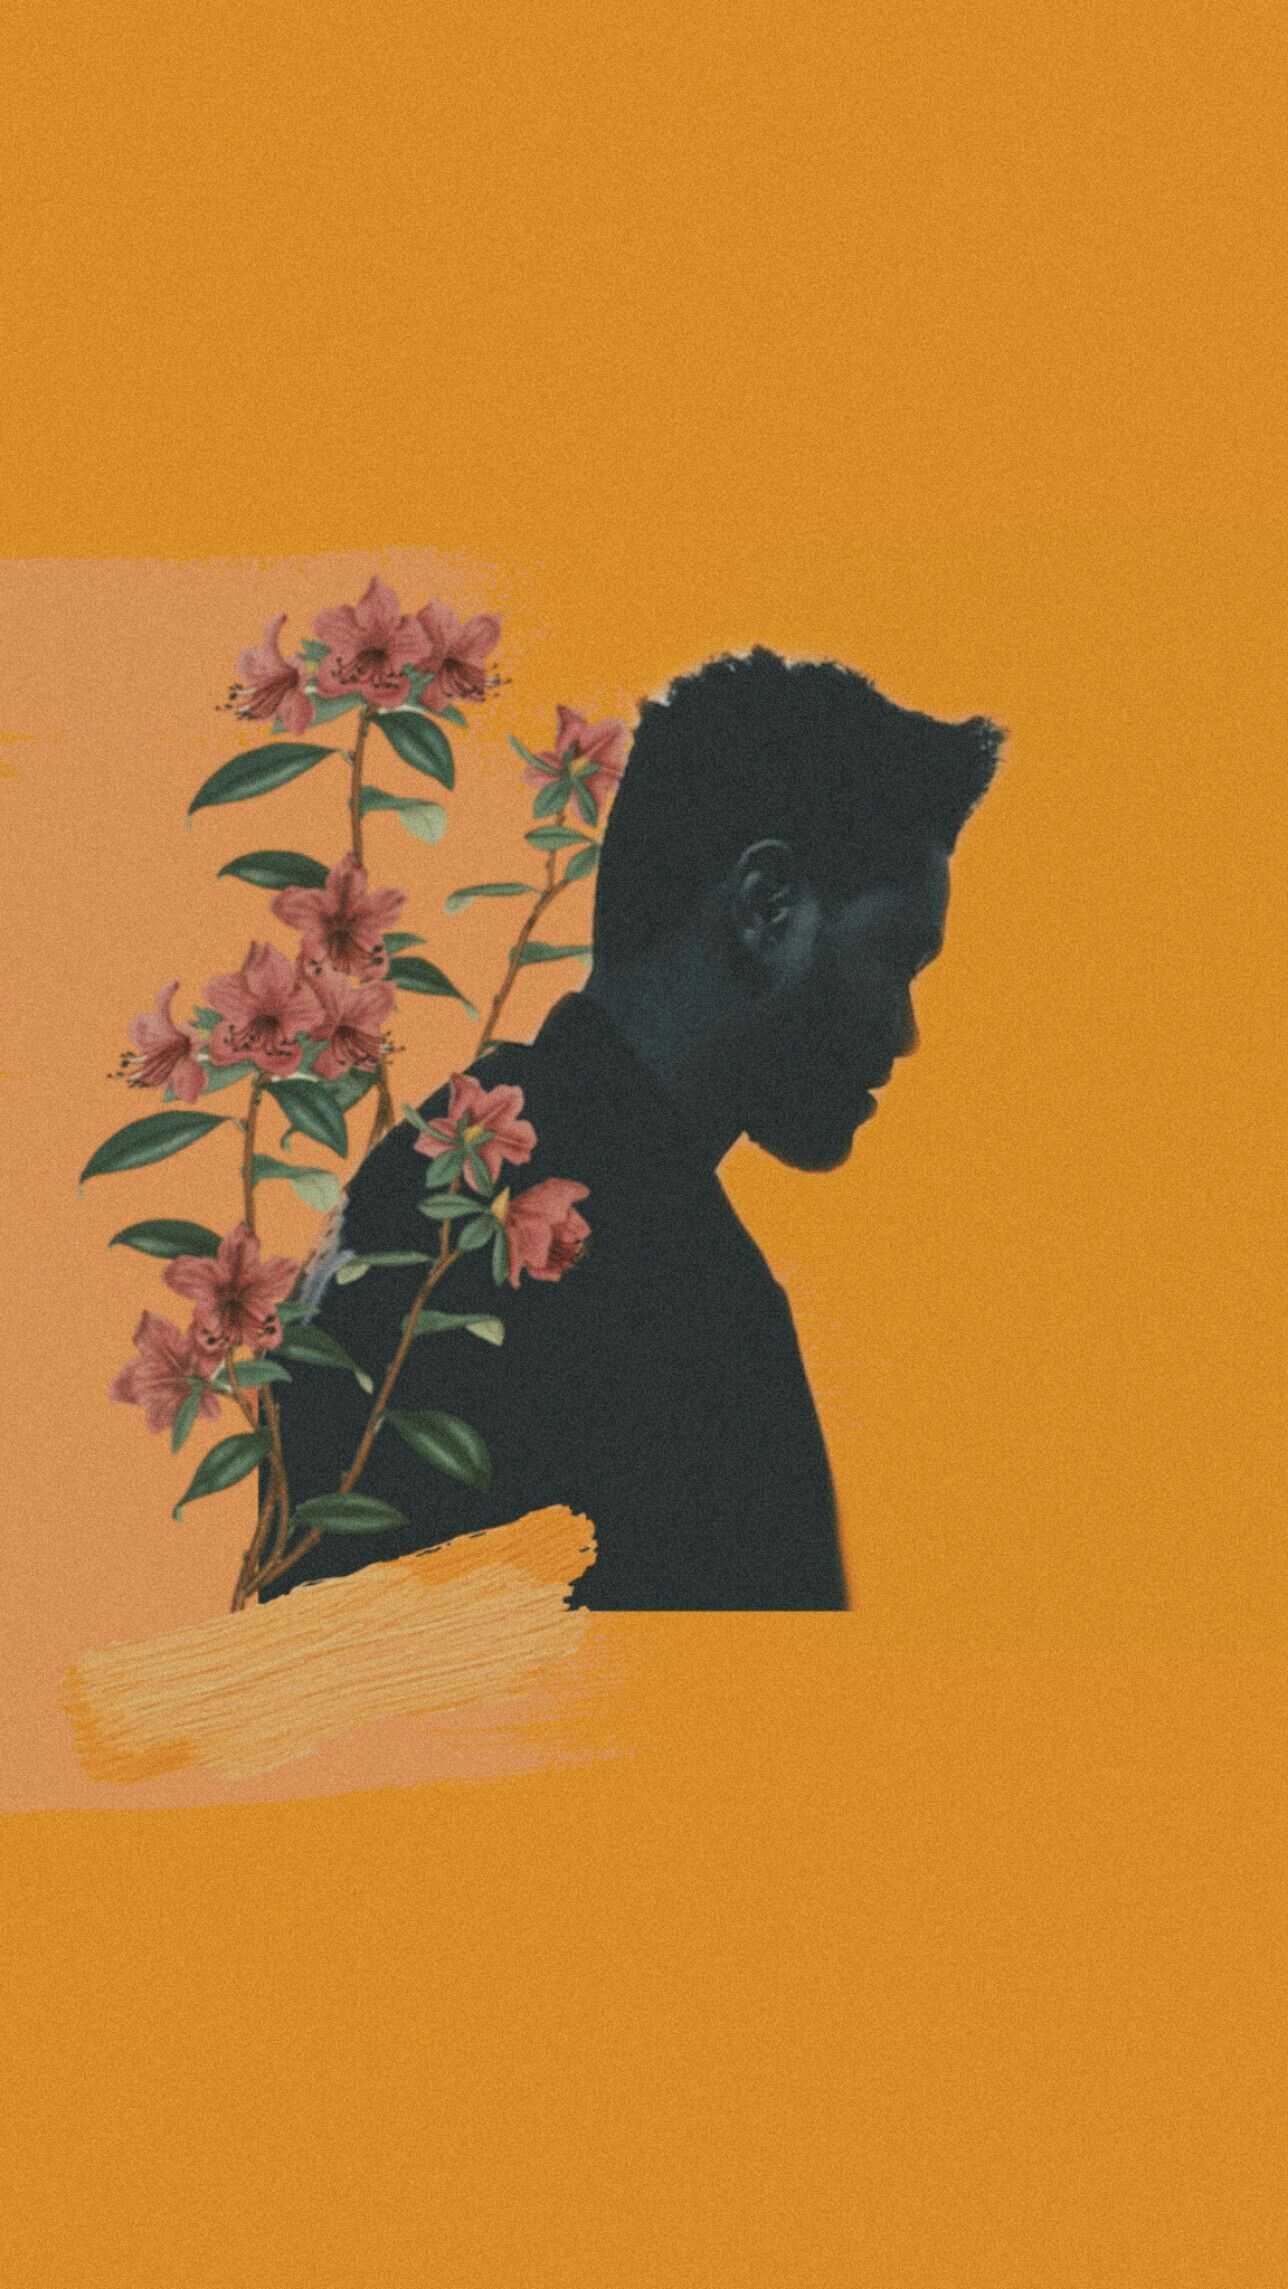 Aesthetic wallpaper phone background of a silhouette of a man with flowers on an orange background - The Weeknd